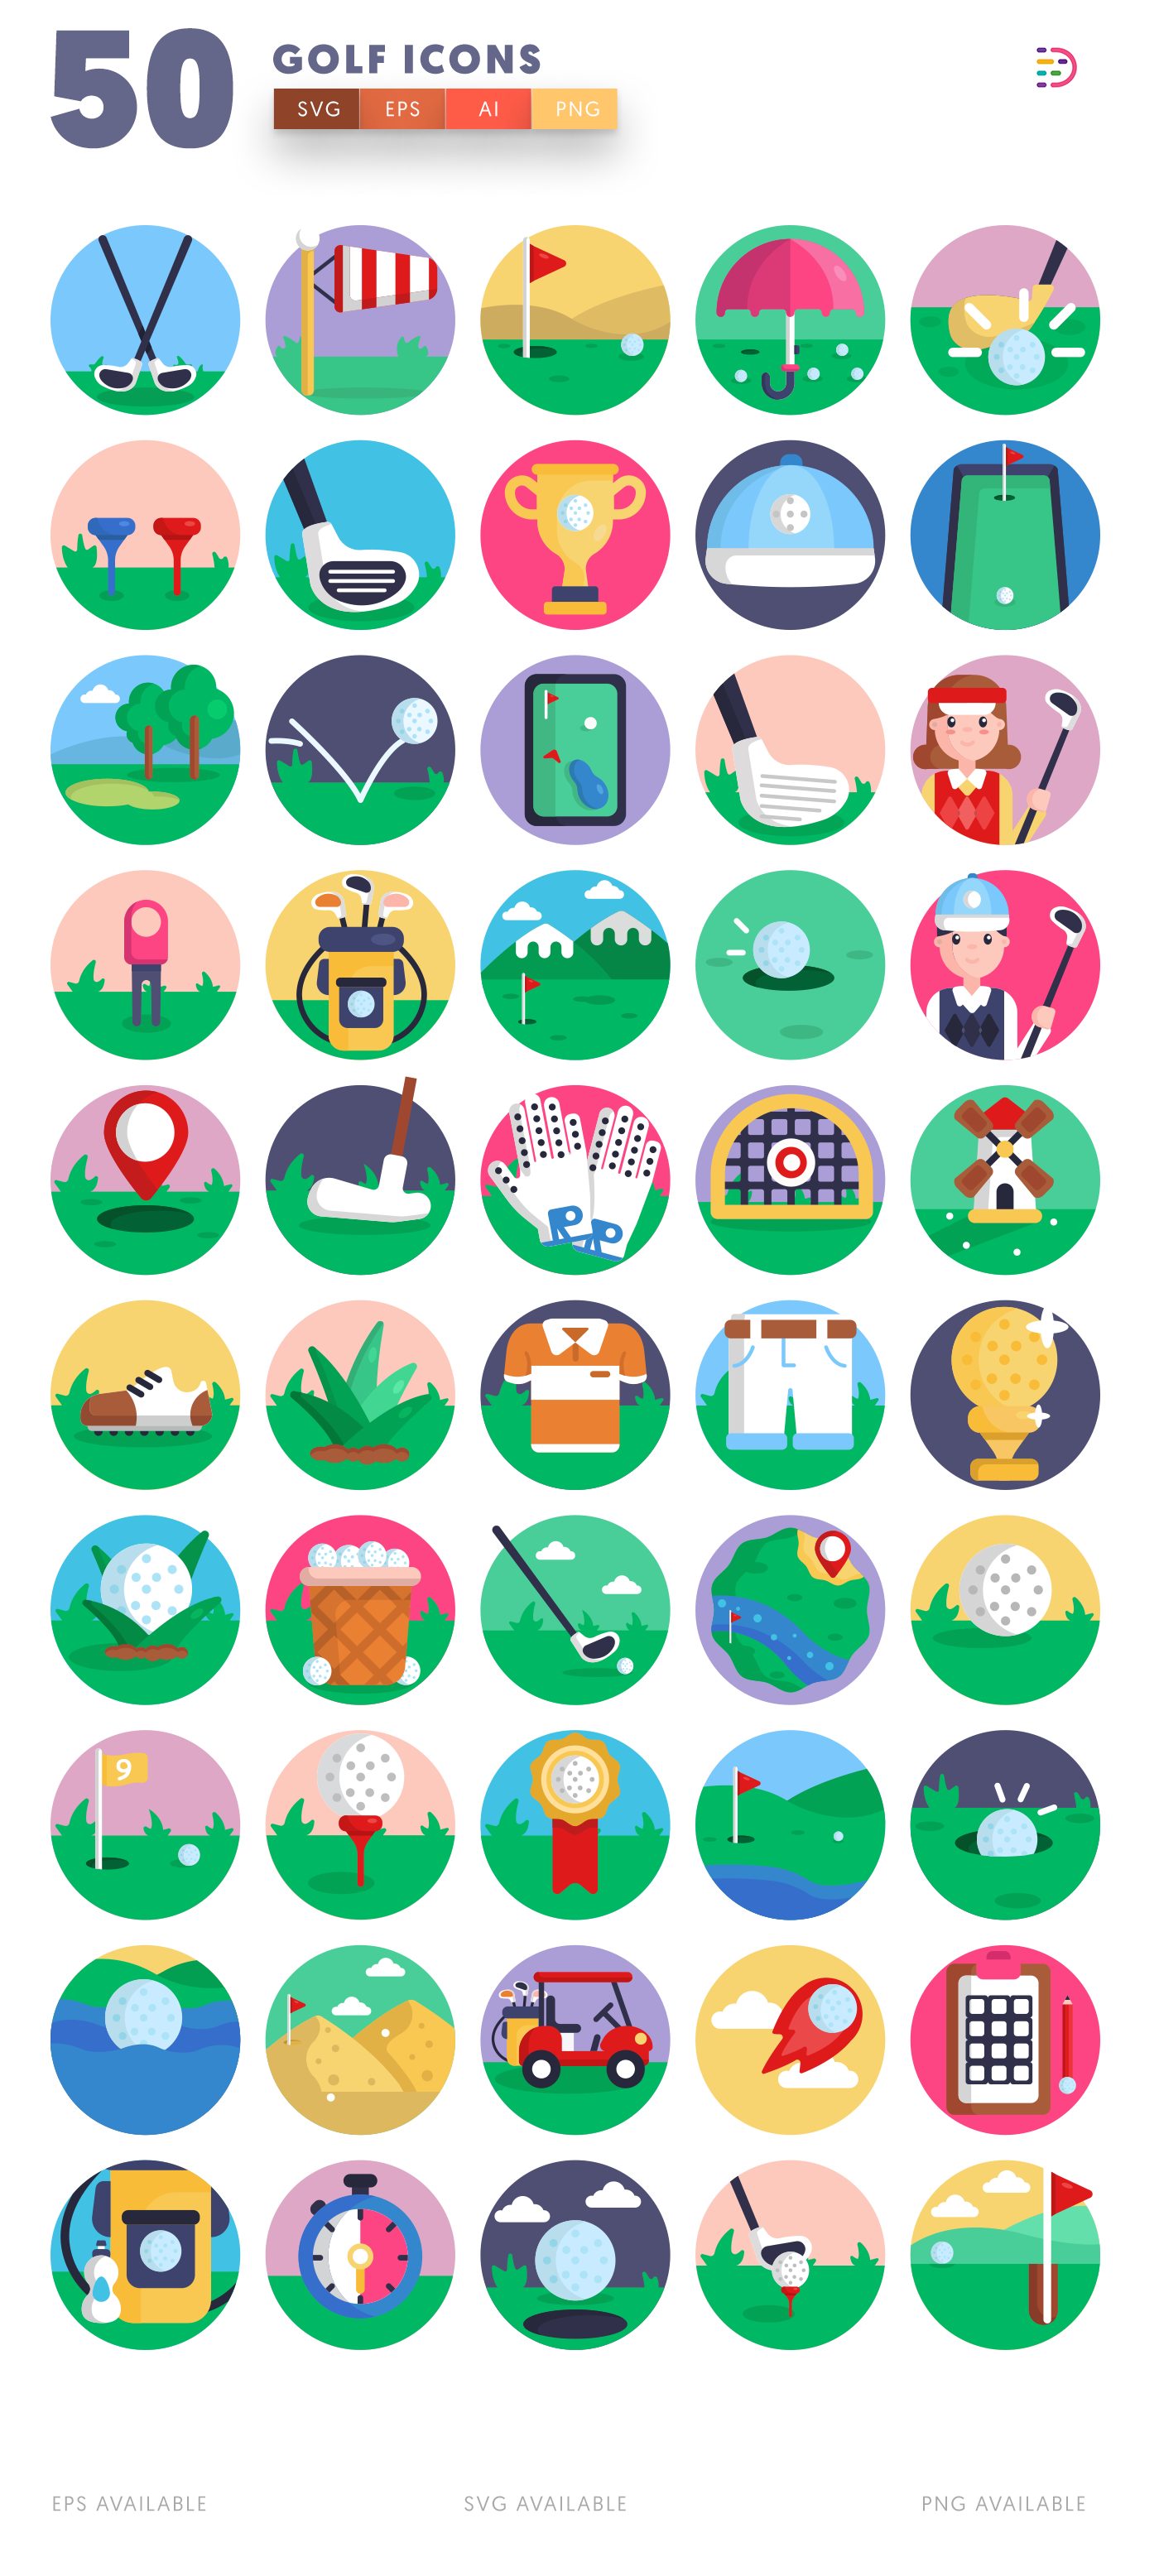 Golf icon pack